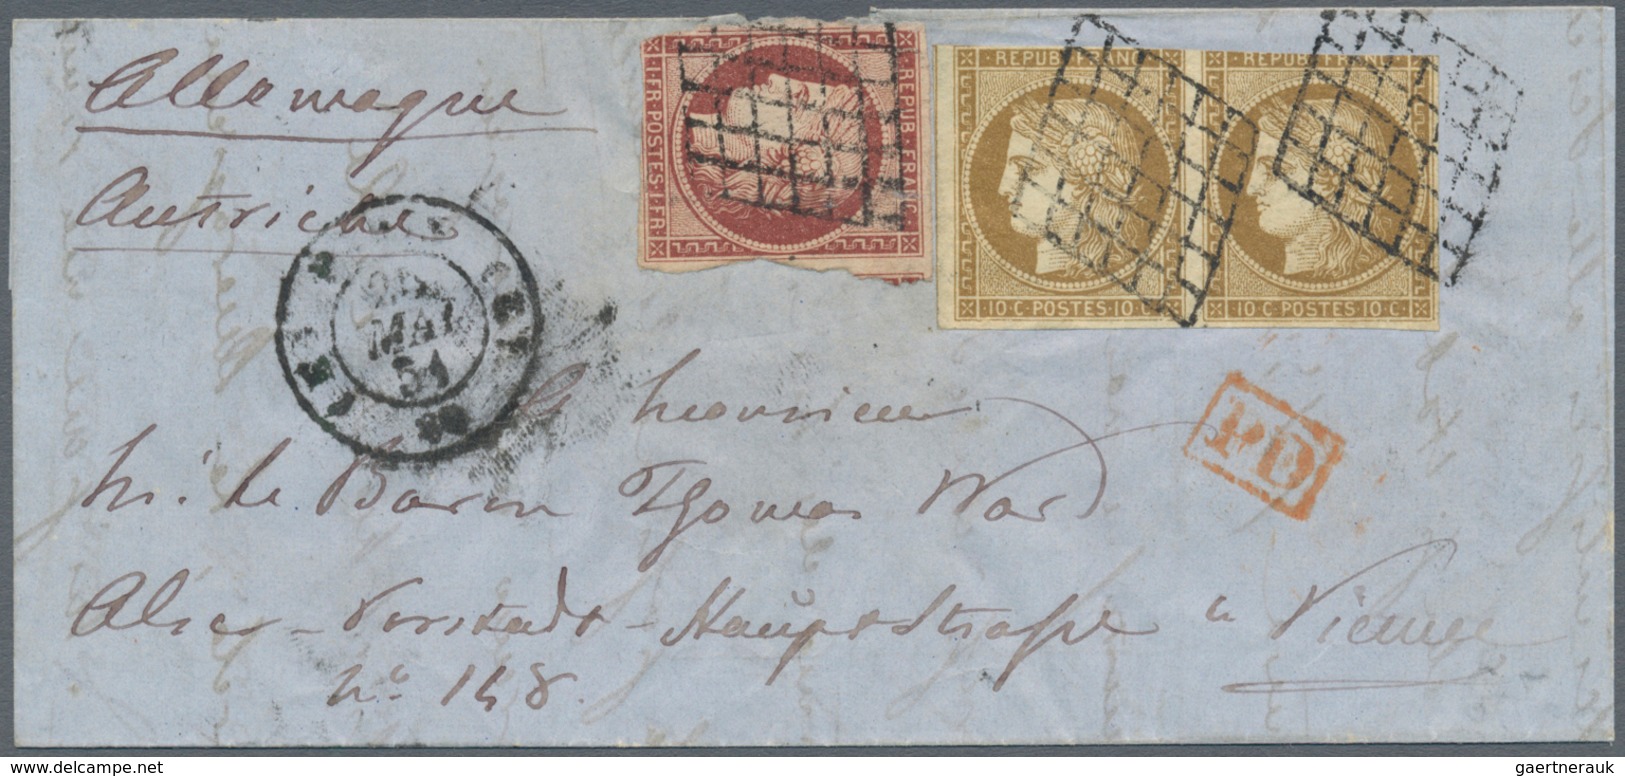 Frankreich: 1849-1870's "FRENCH POSTAL HISTORY": Collection of more than 30 special, attractive, sca